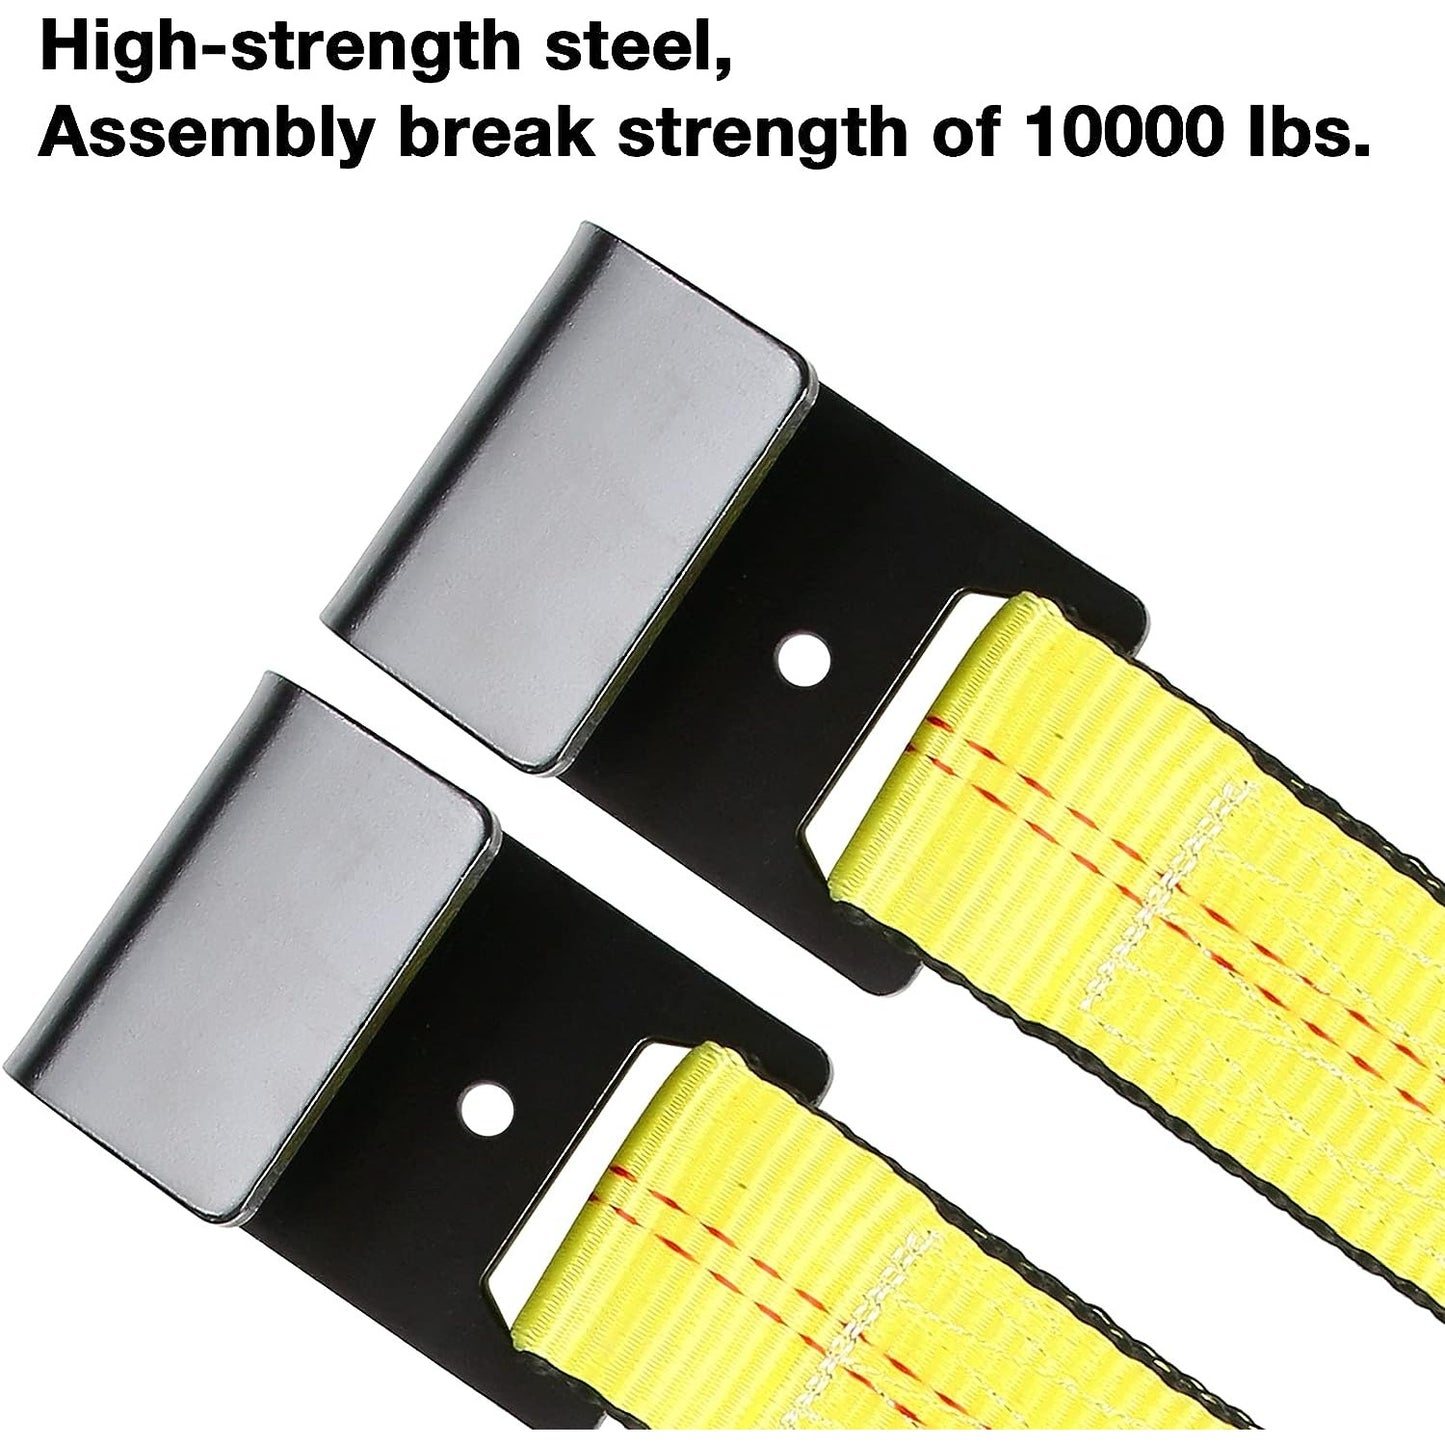 Hemdre Tow Dolly Basket Straps with Flat Hook-2 Pack,Tow Dolly Strap, Universal Vehicle Car Dolly Straps Accessories